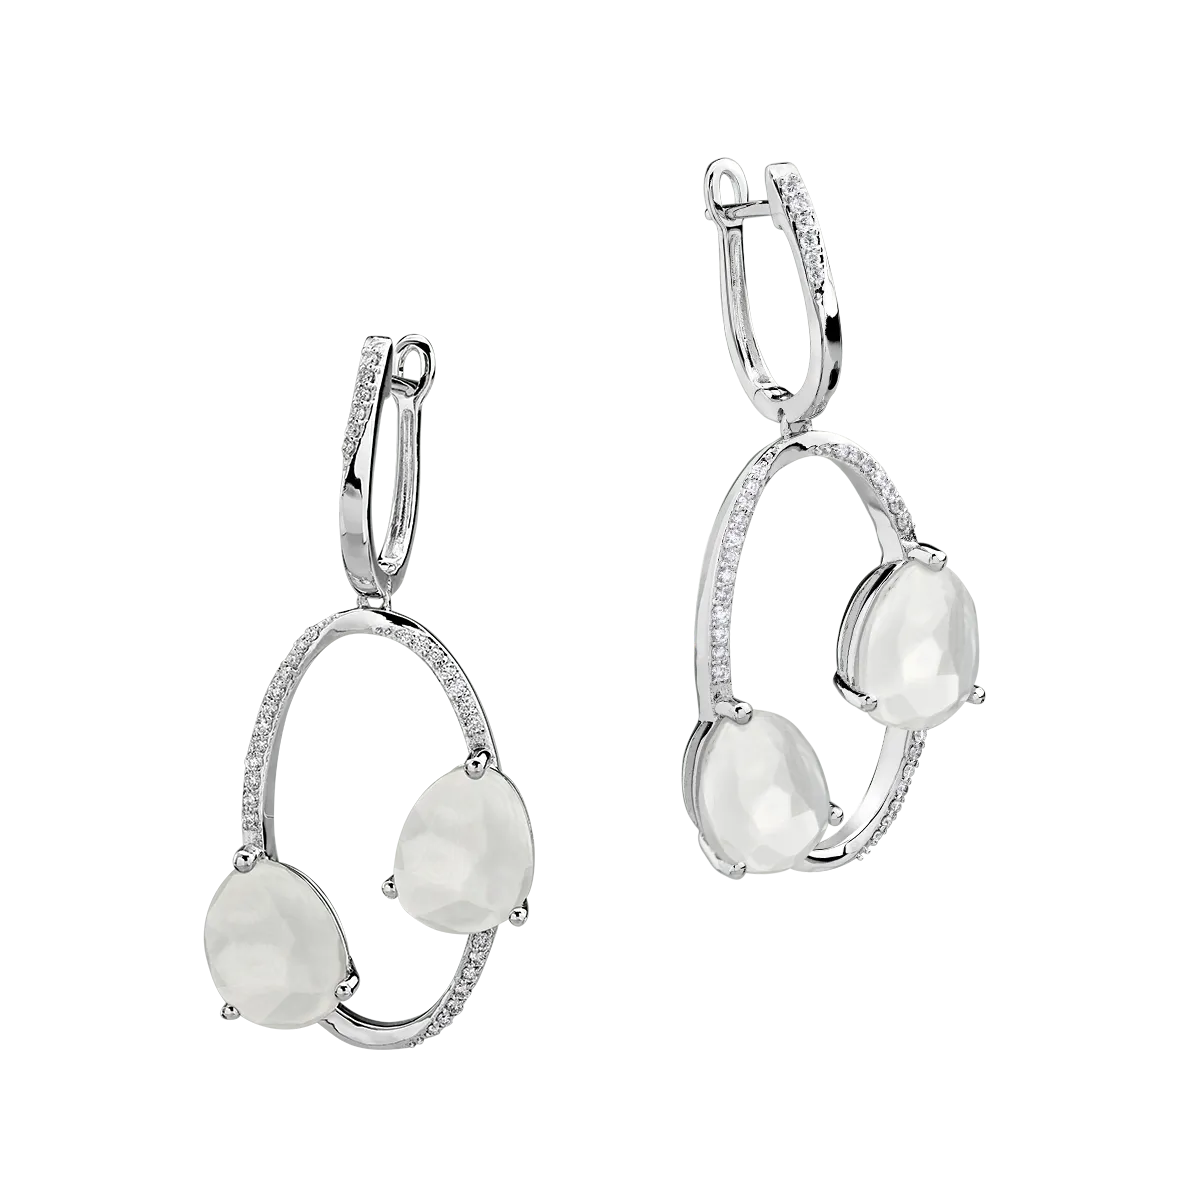 18K white gold earrings with 8.75ct white moonstone and 0.283ct diamonds